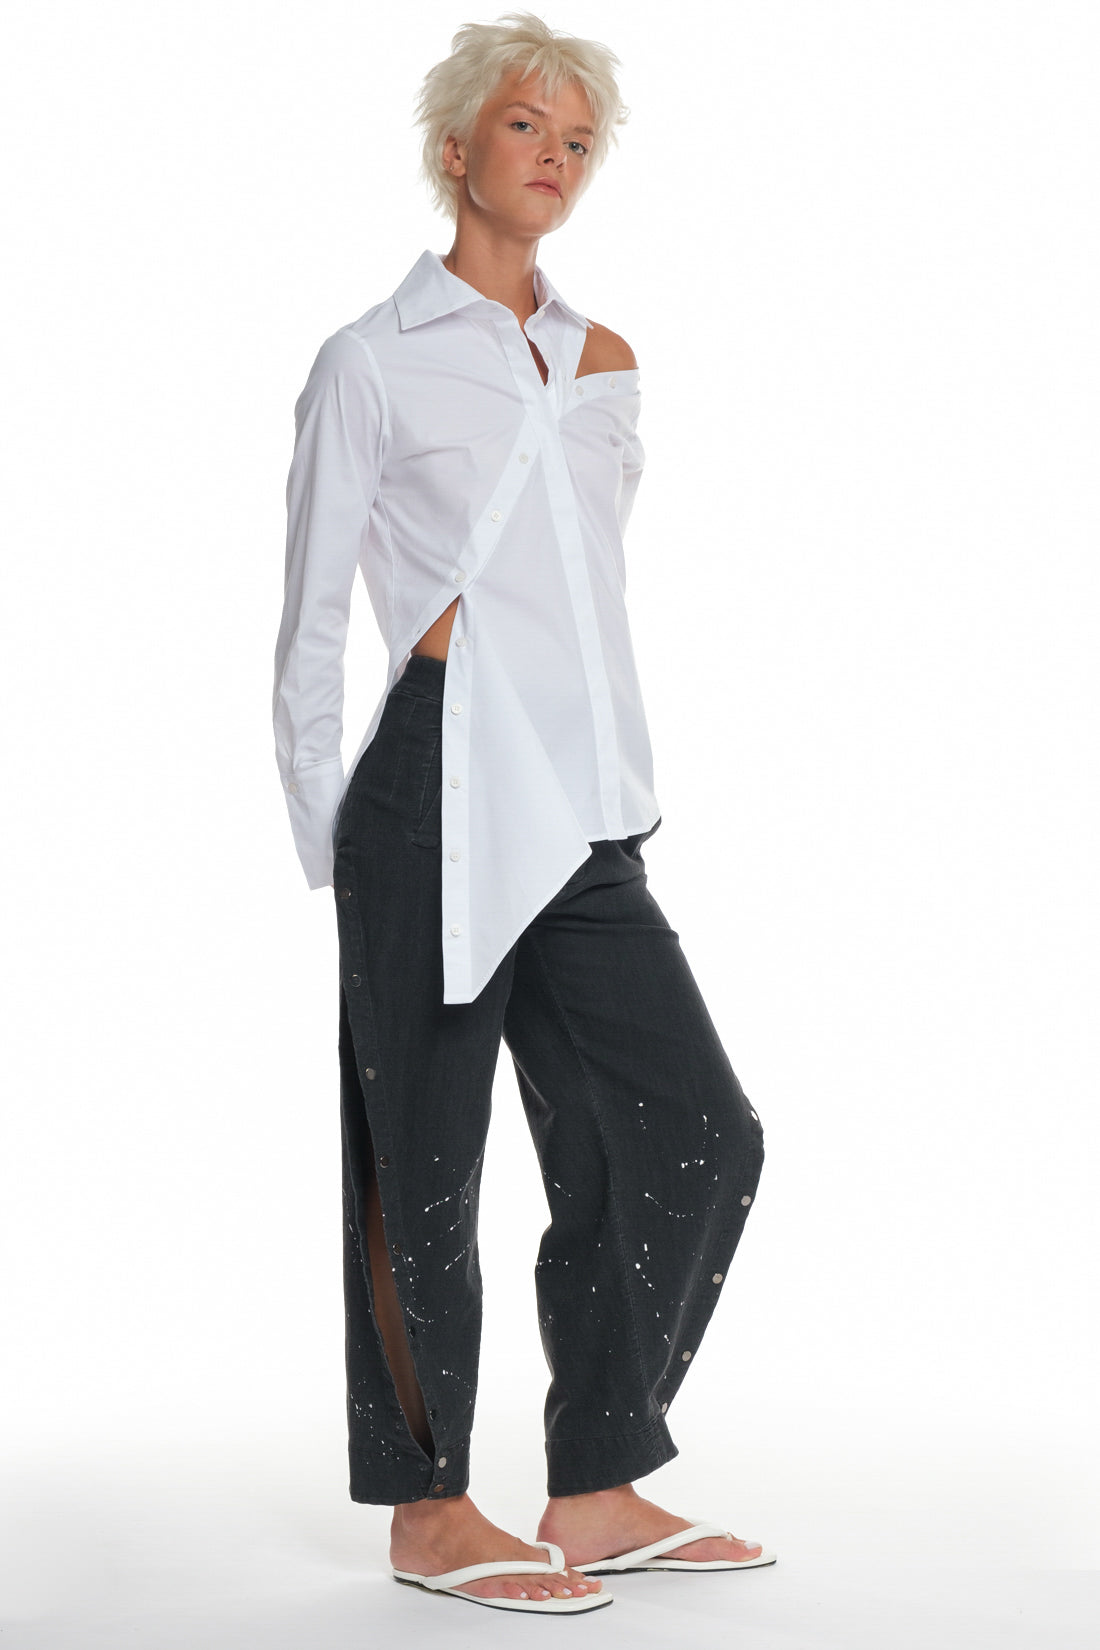 POPLIN COTTON SHIRT WITH DIAGONAL CUTTING AND BUTTONING, OPEN SHOULDER, LONG SLEEVES, ASYMMETRICAL ON THE SIDE OF THE BUTTONING.